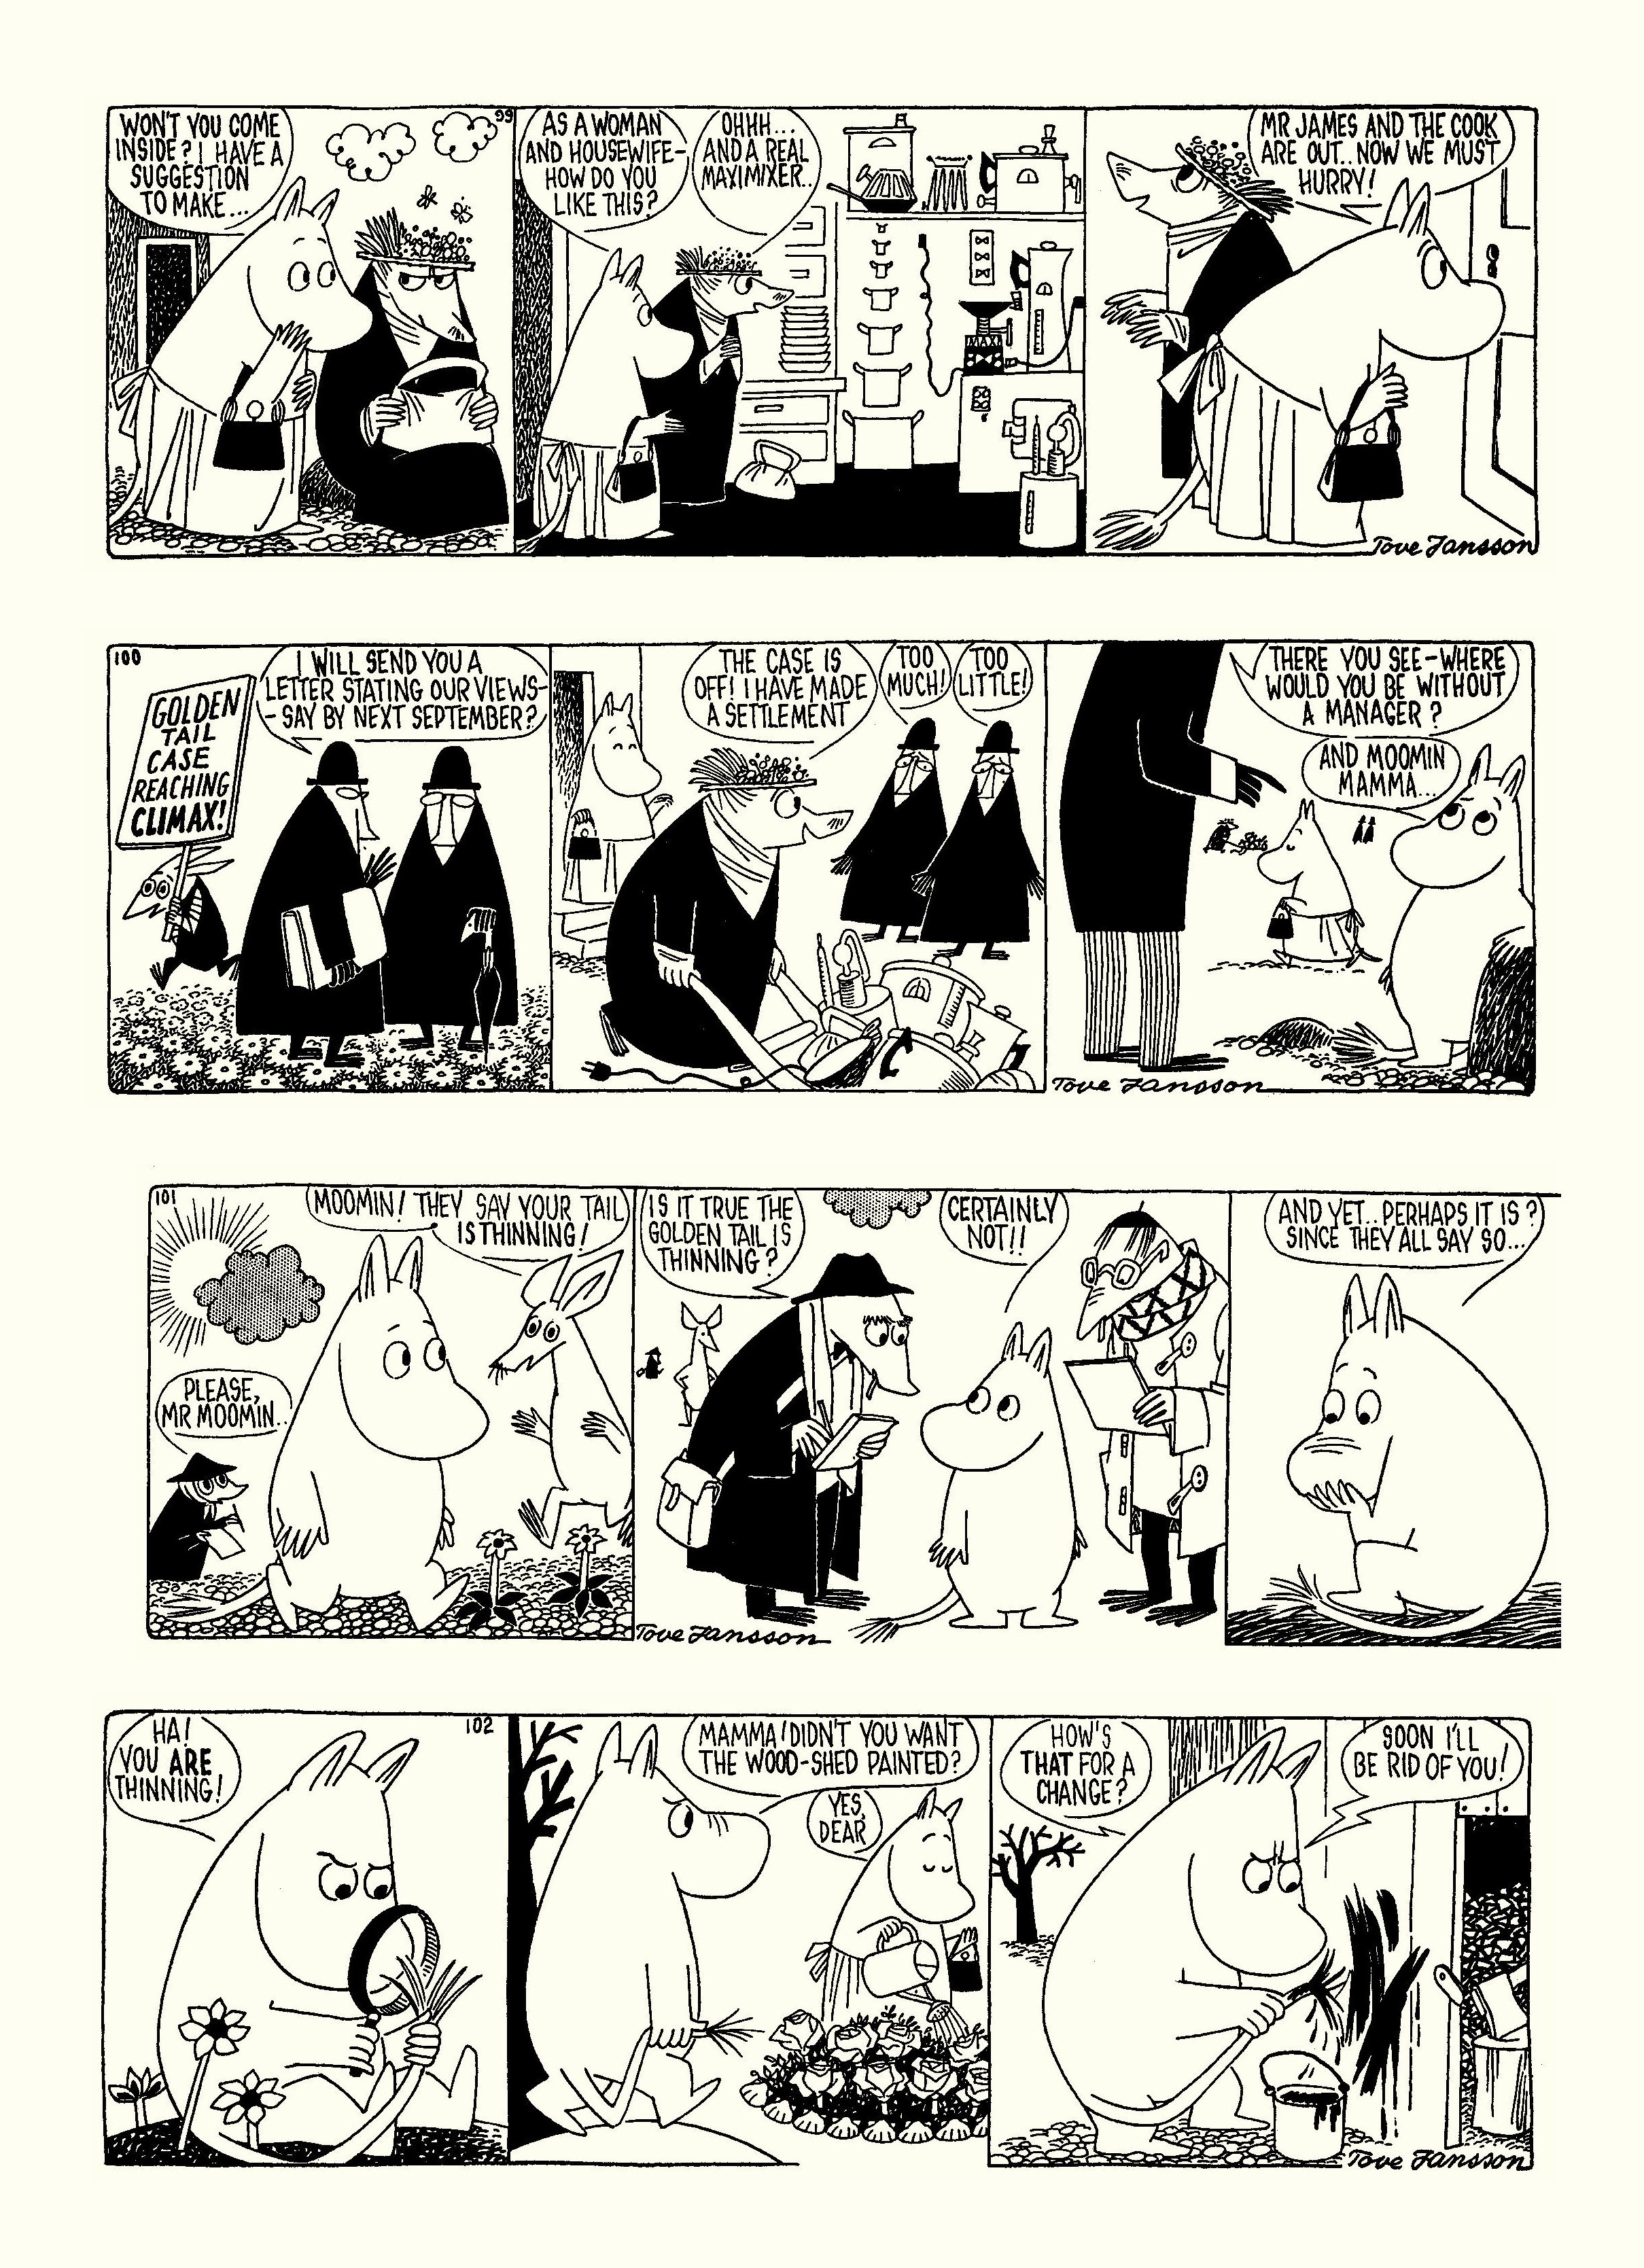 Read online Moomin: The Complete Tove Jansson Comic Strip comic -  Issue # TPB 4 - 104